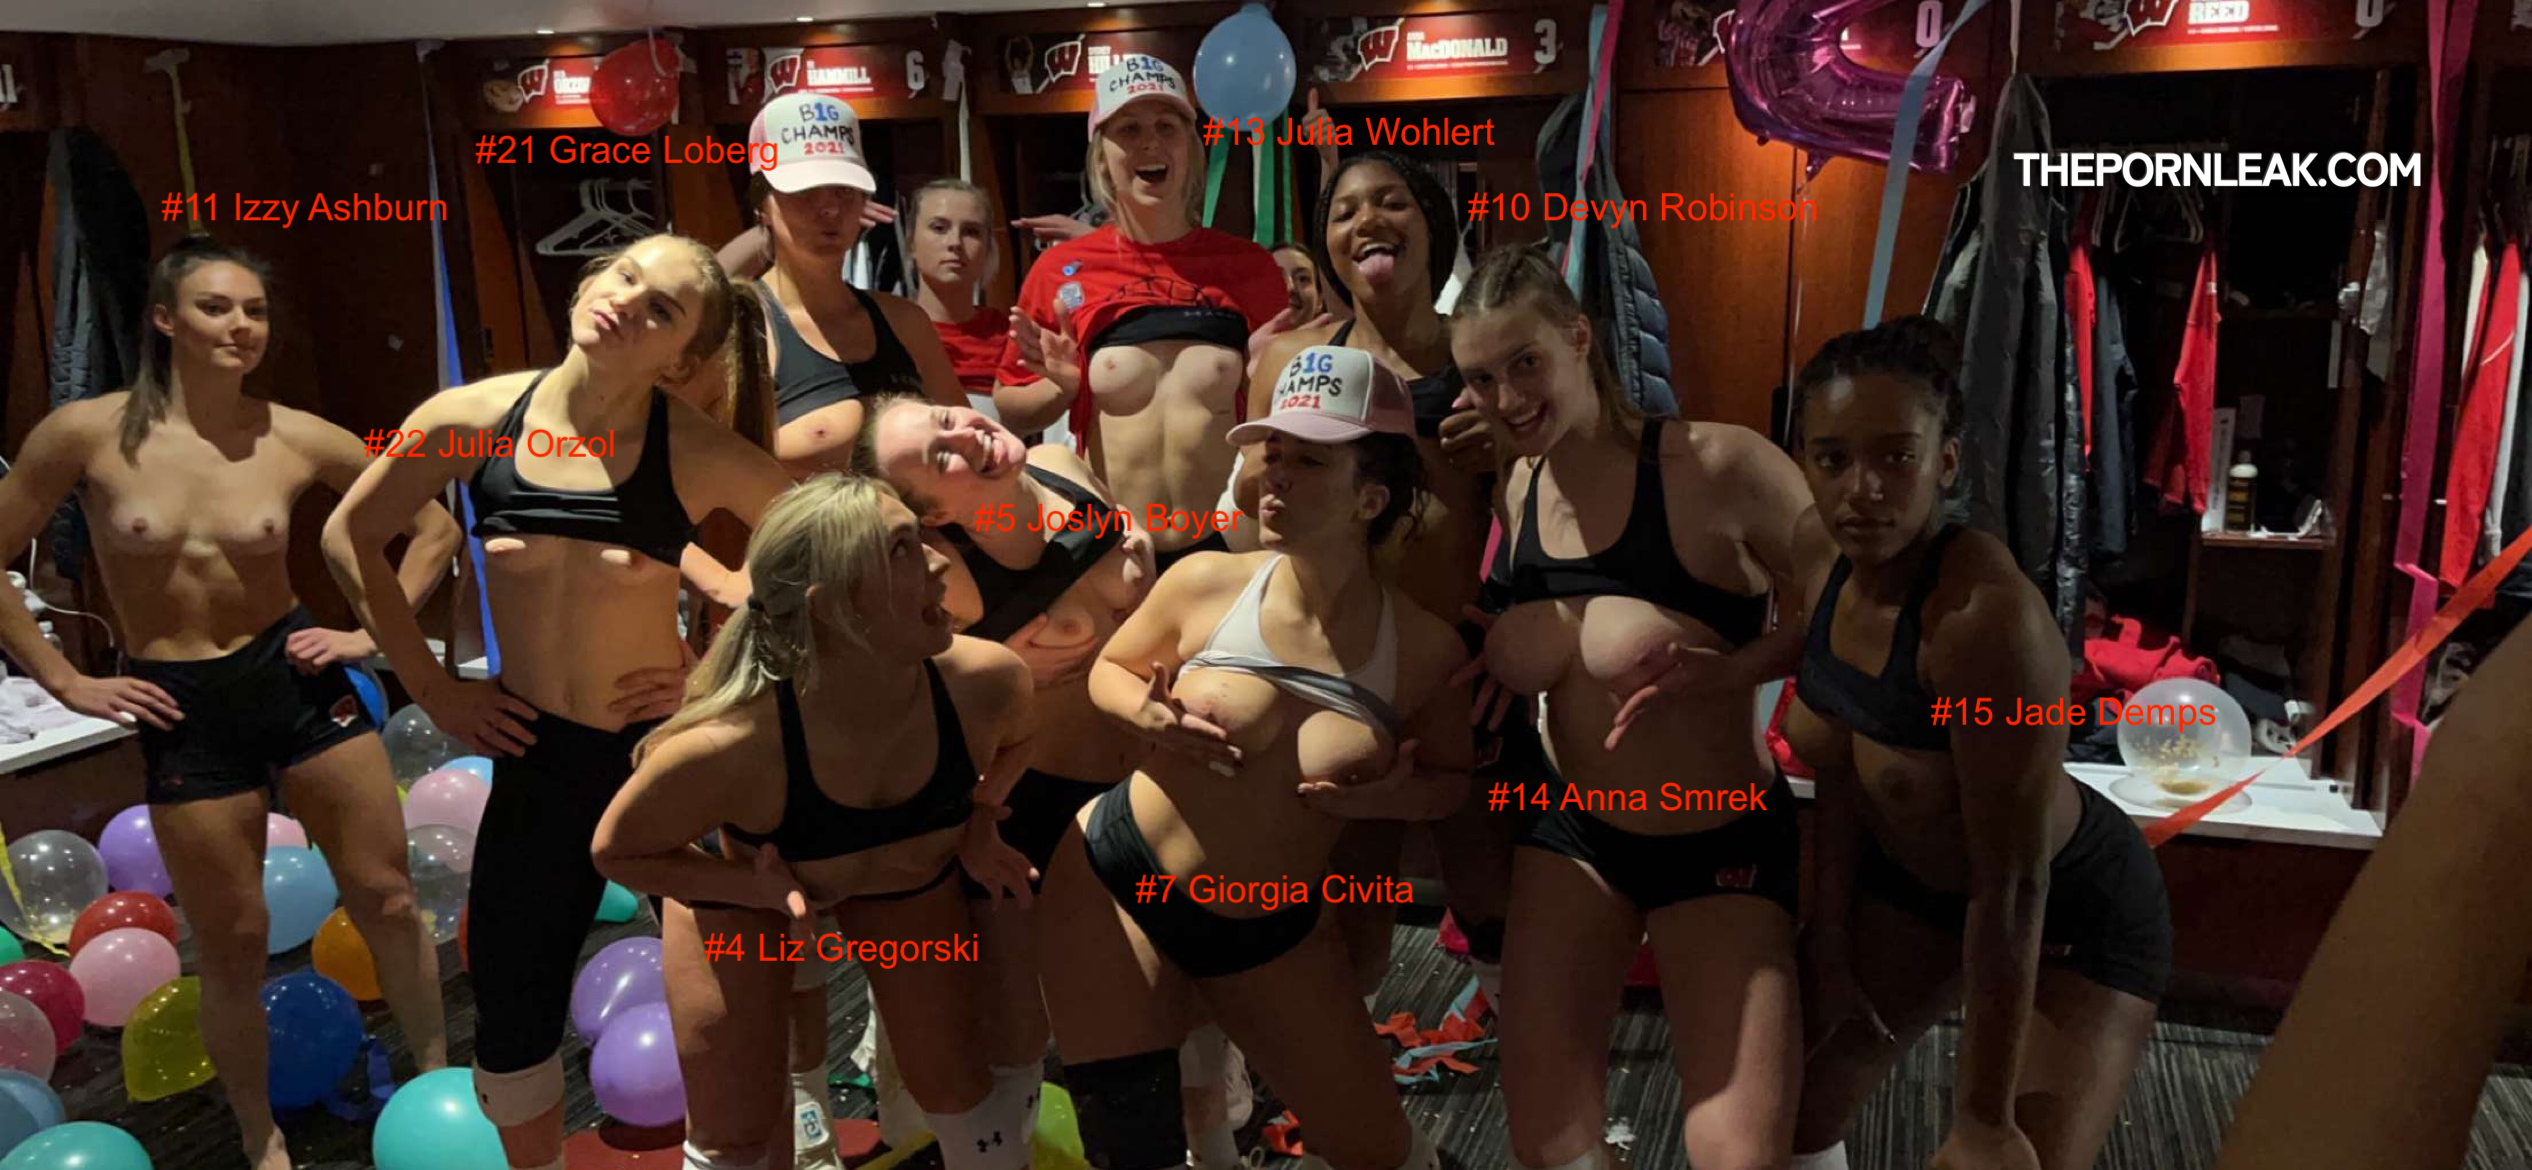 Wisconsin Volleyball Nudes17